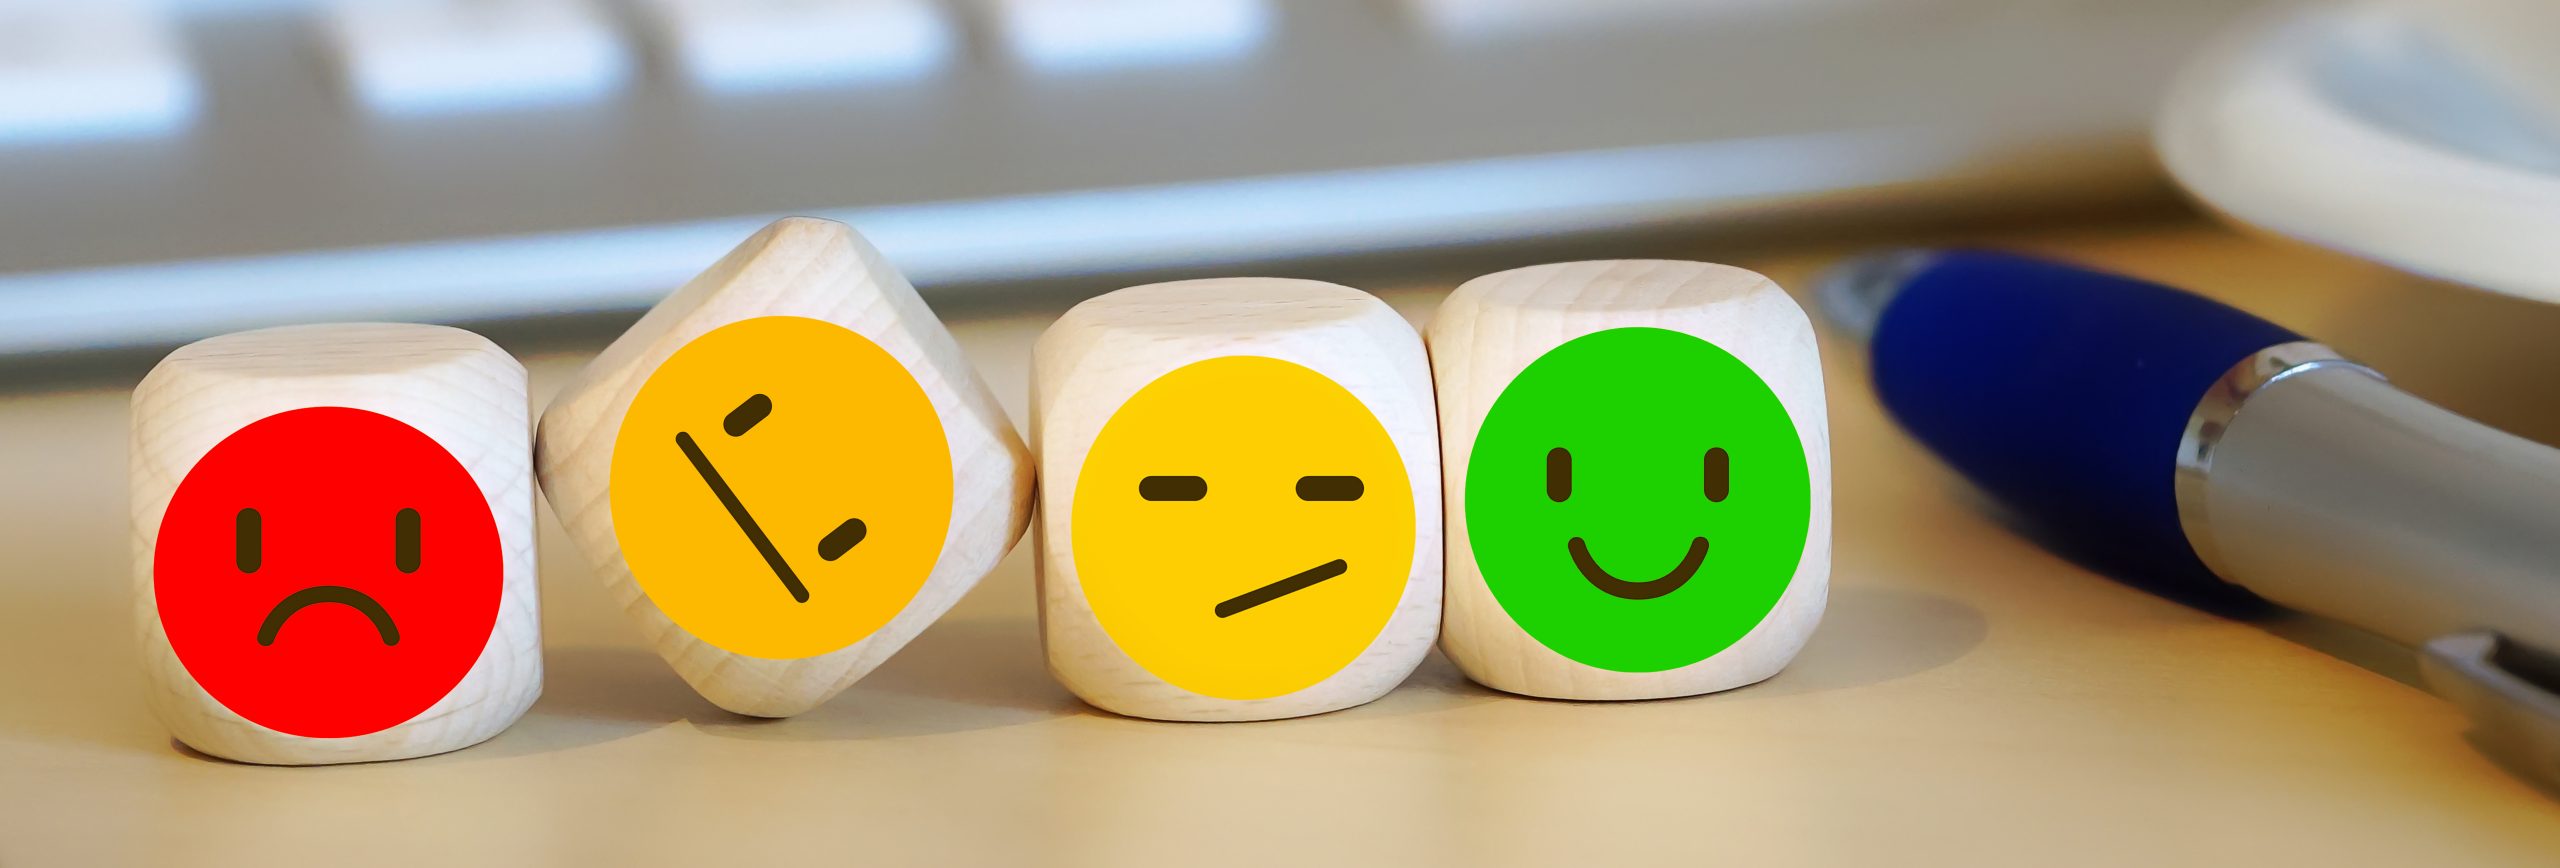 Customer review, happy and sad face dice